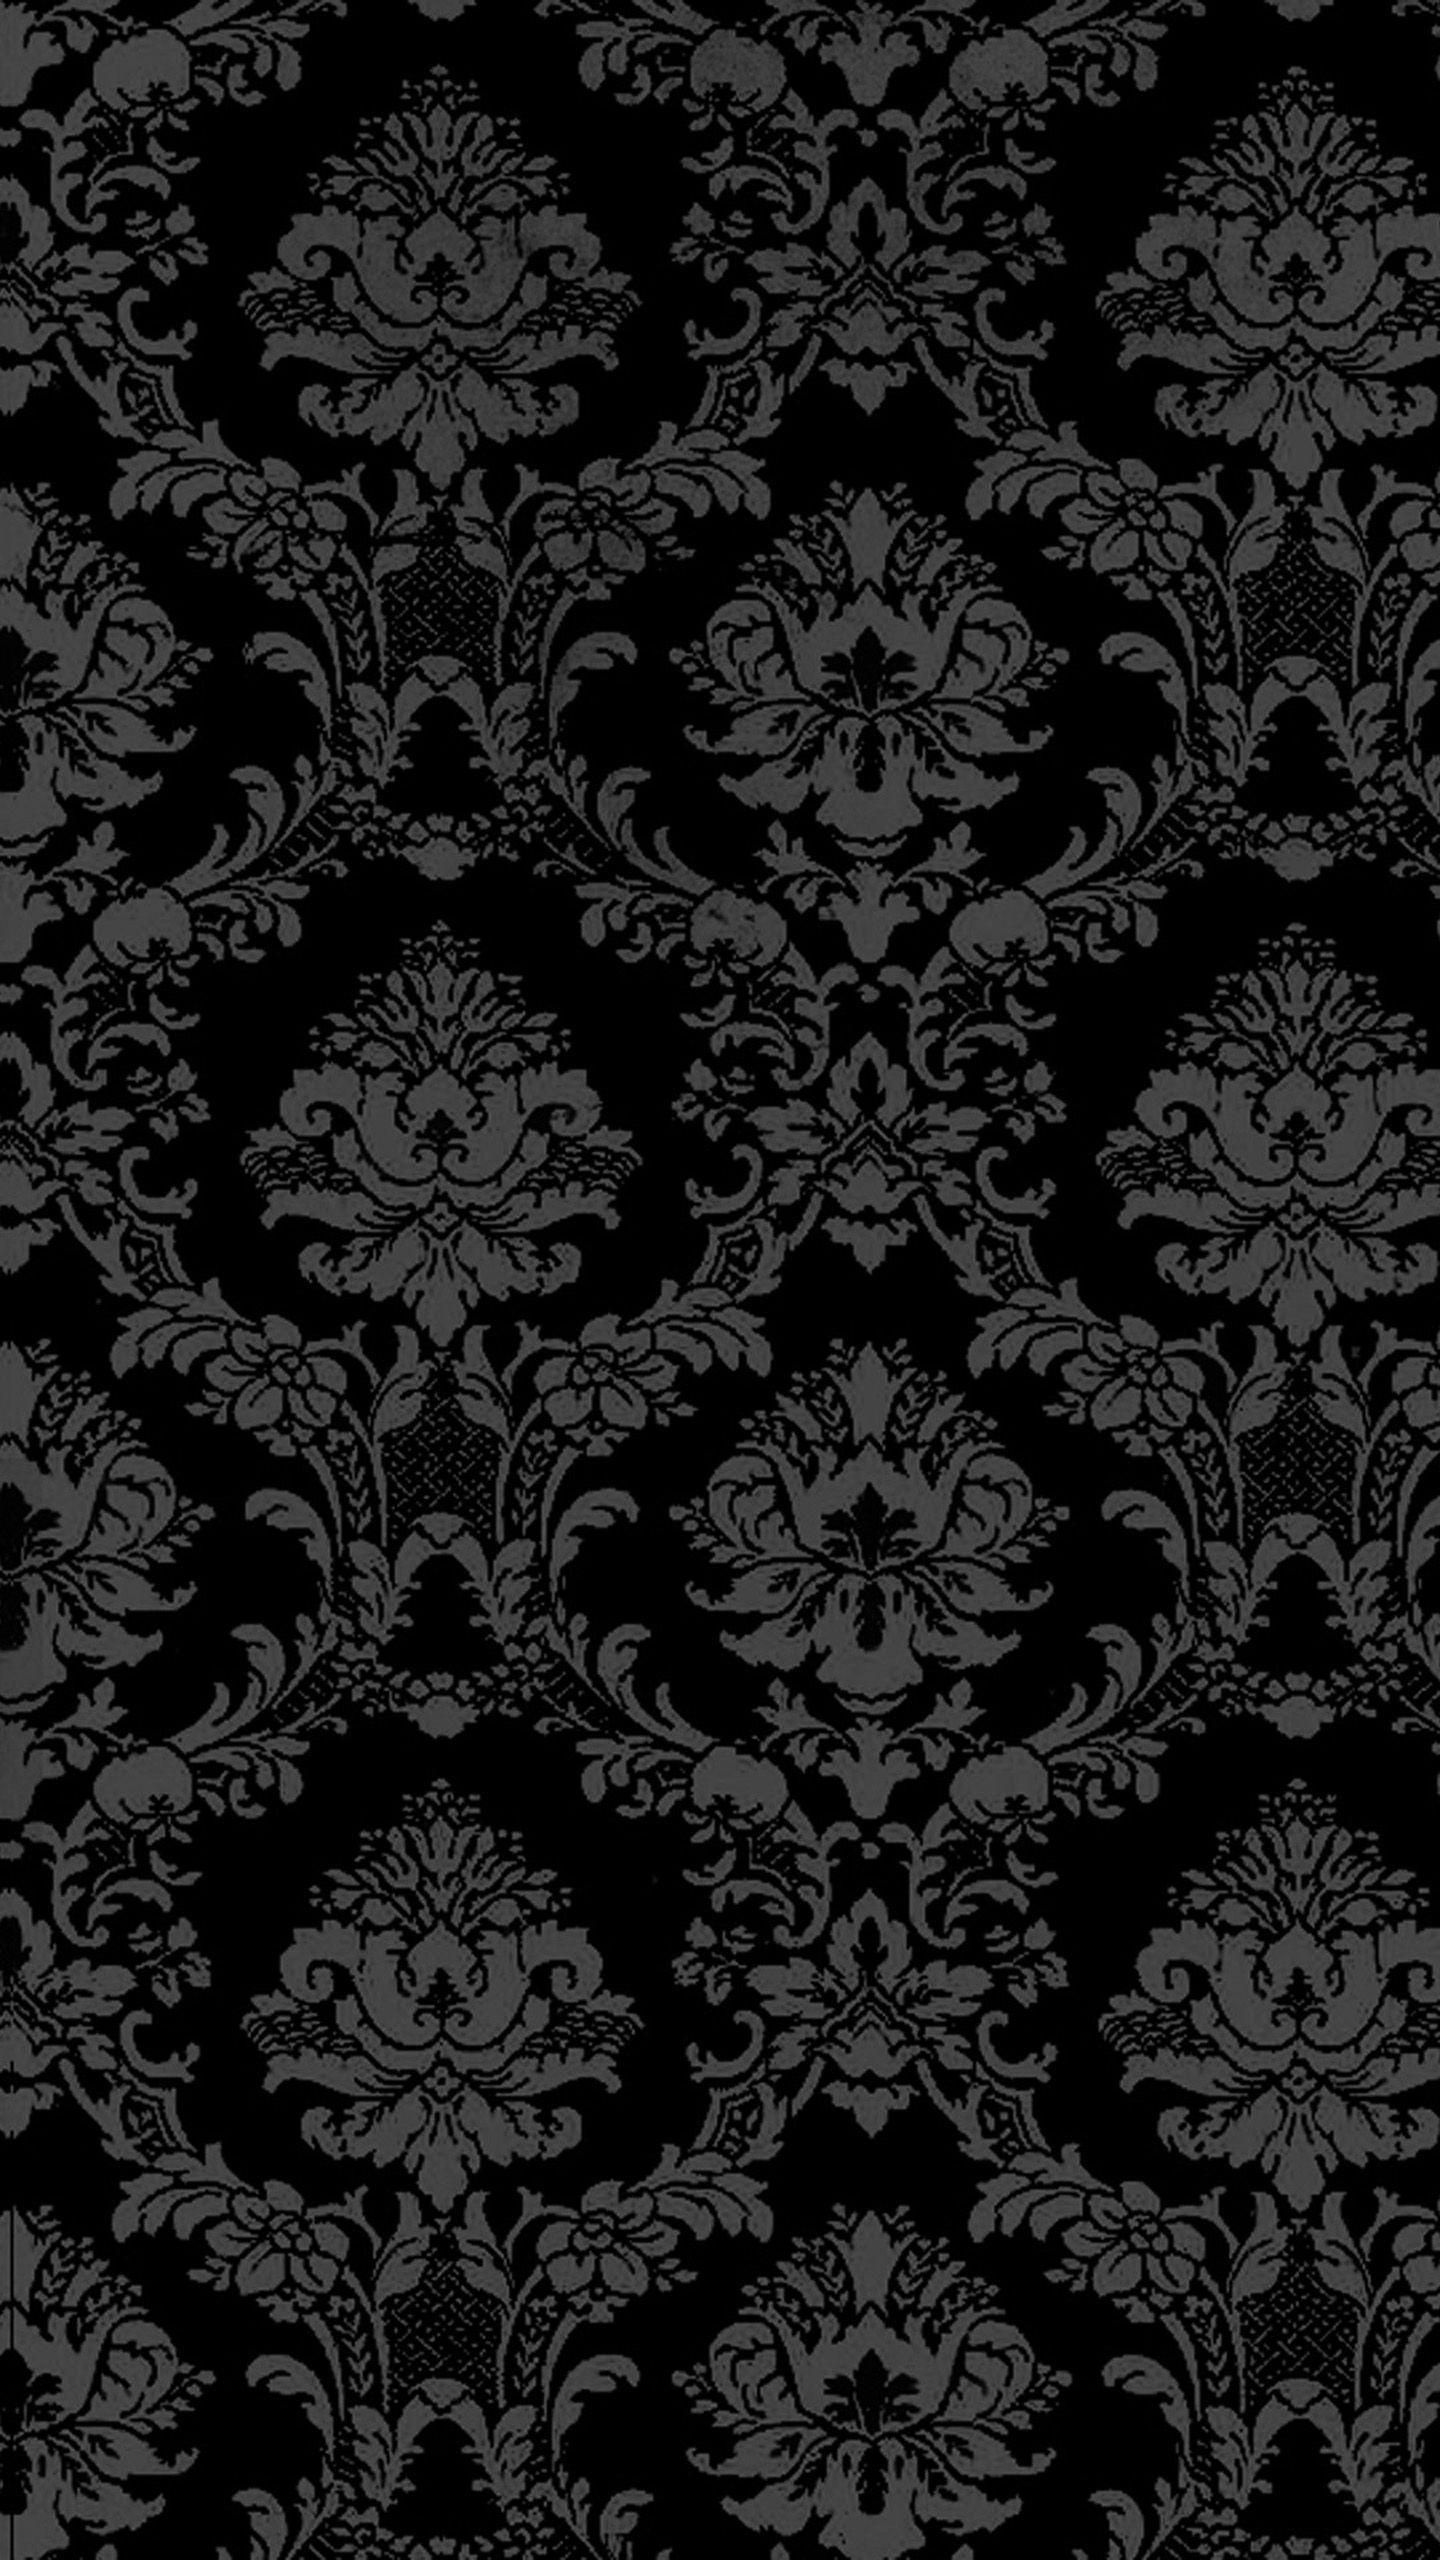 PK13 HD Pattern Picture (Mobile, PC, iPhone and more)